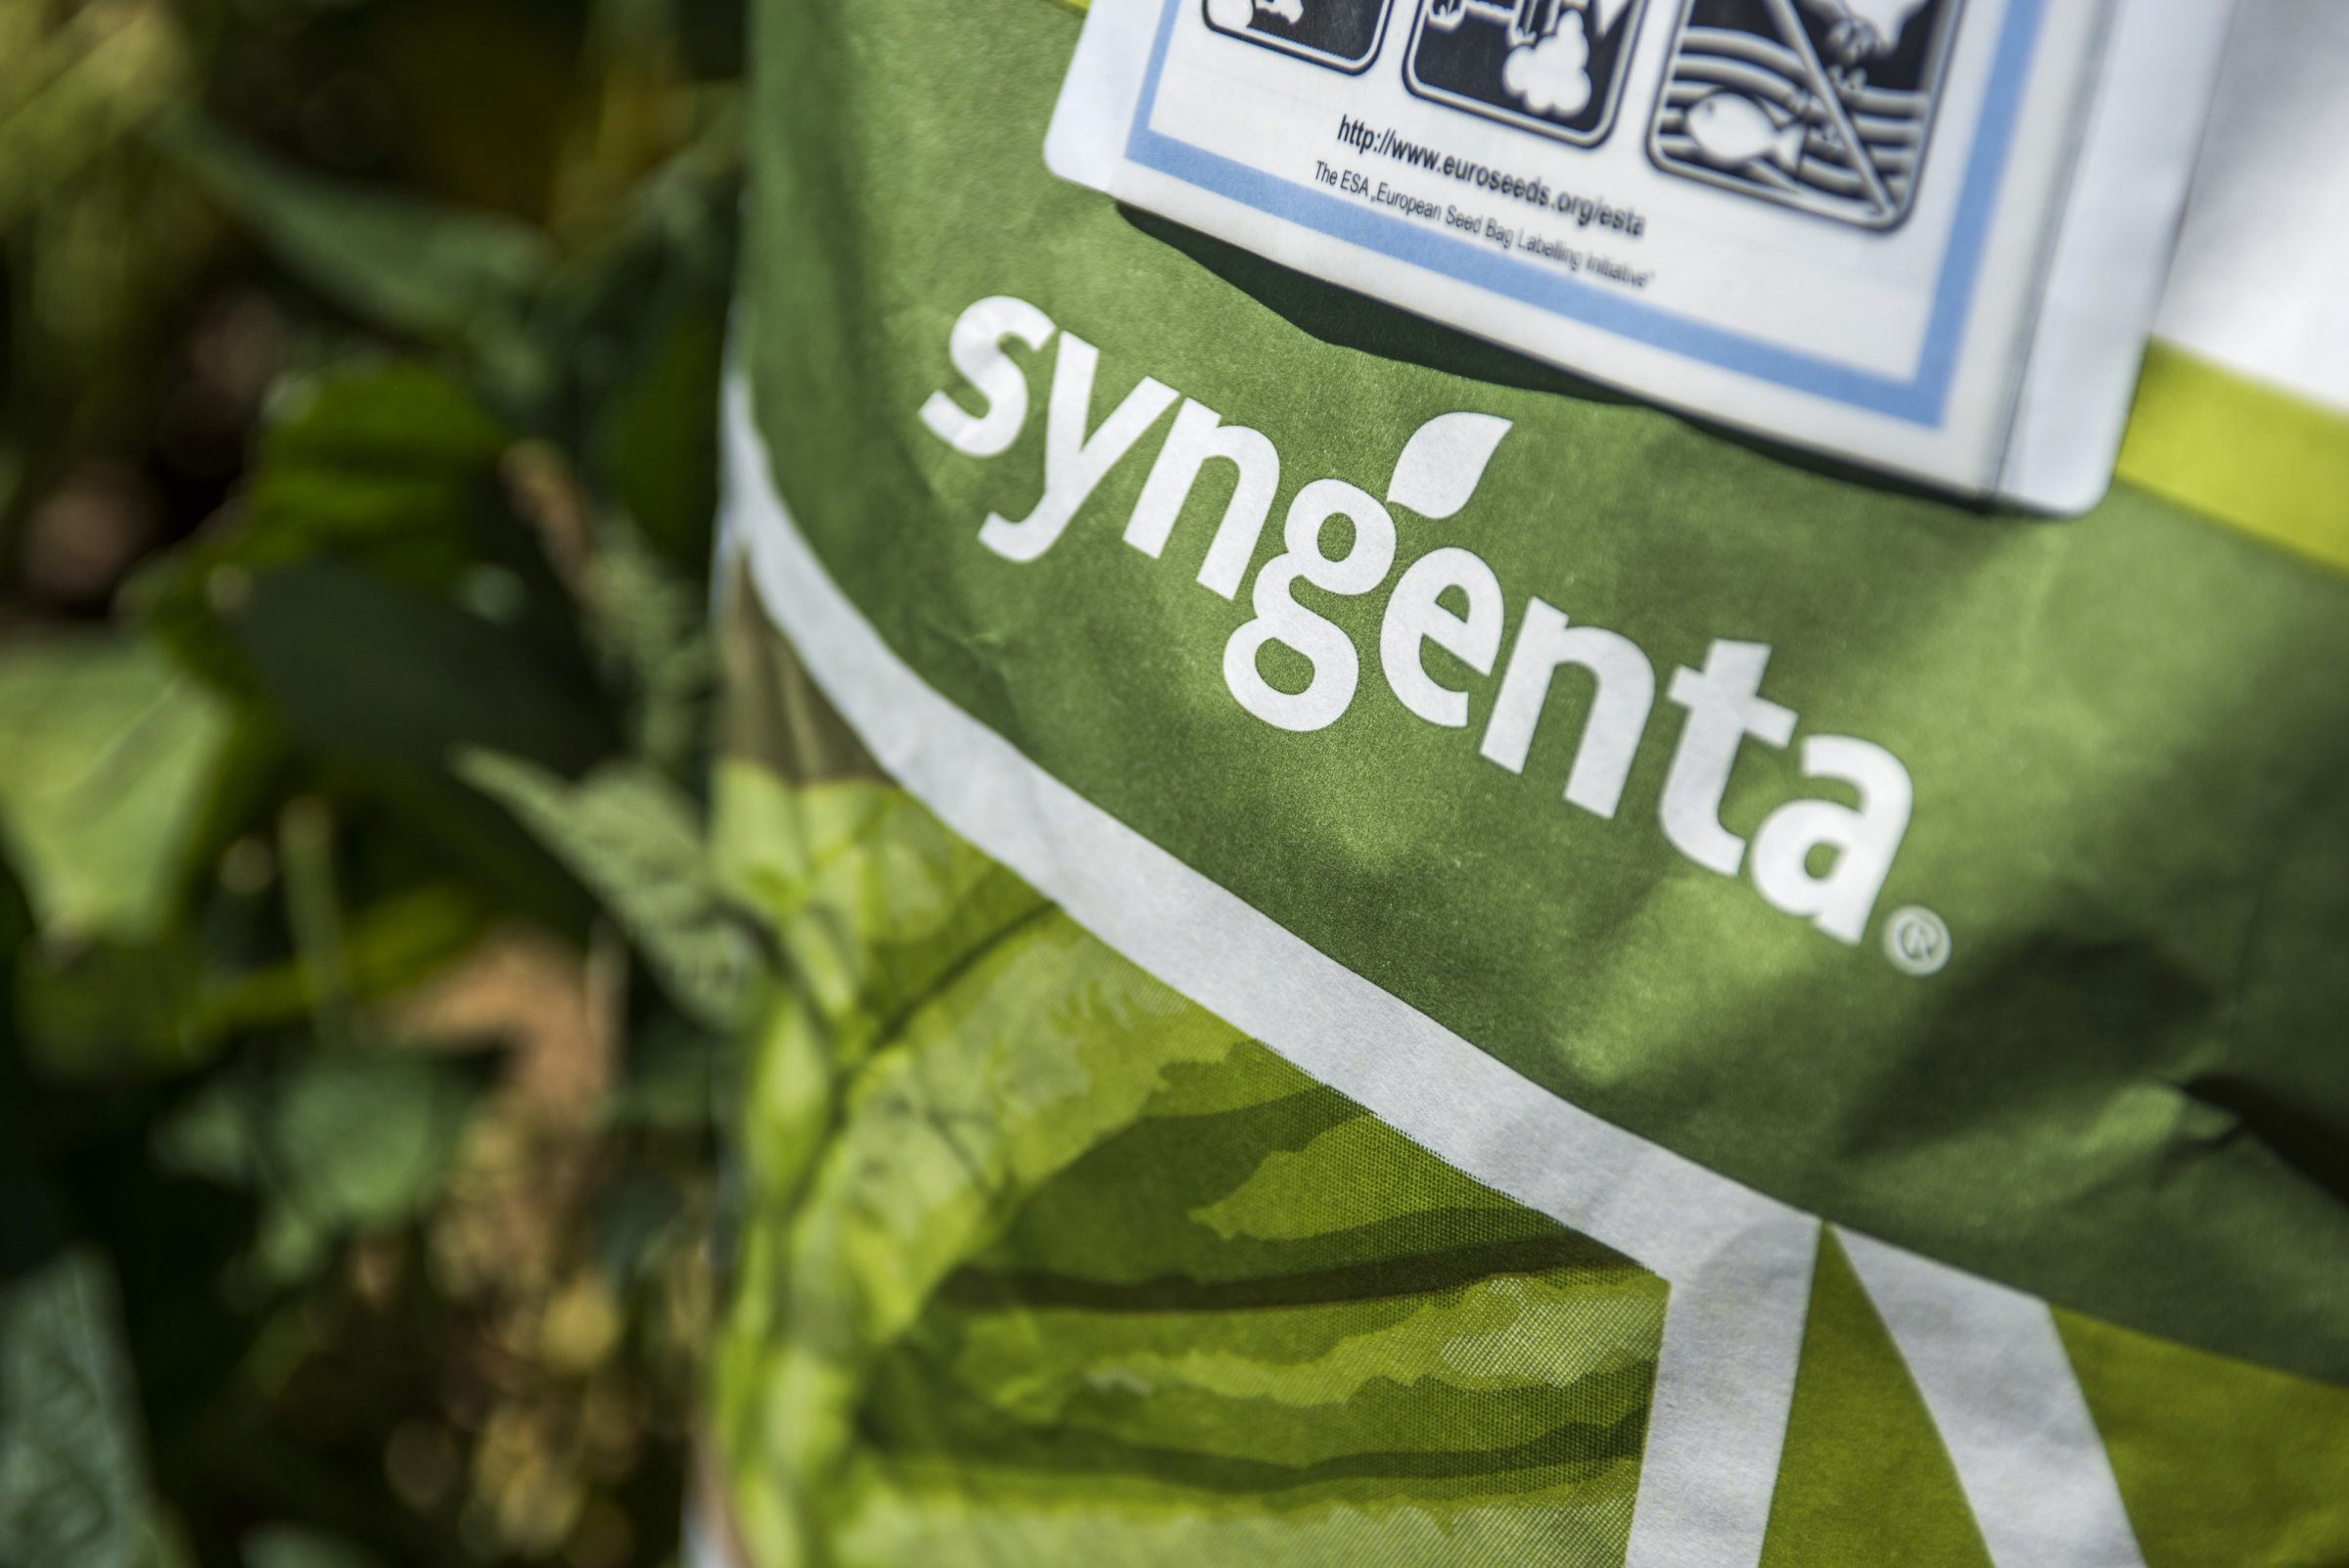 Syngenta AG Crops And Seeds Following China National Chemical Corp. $43 Billion Takeover